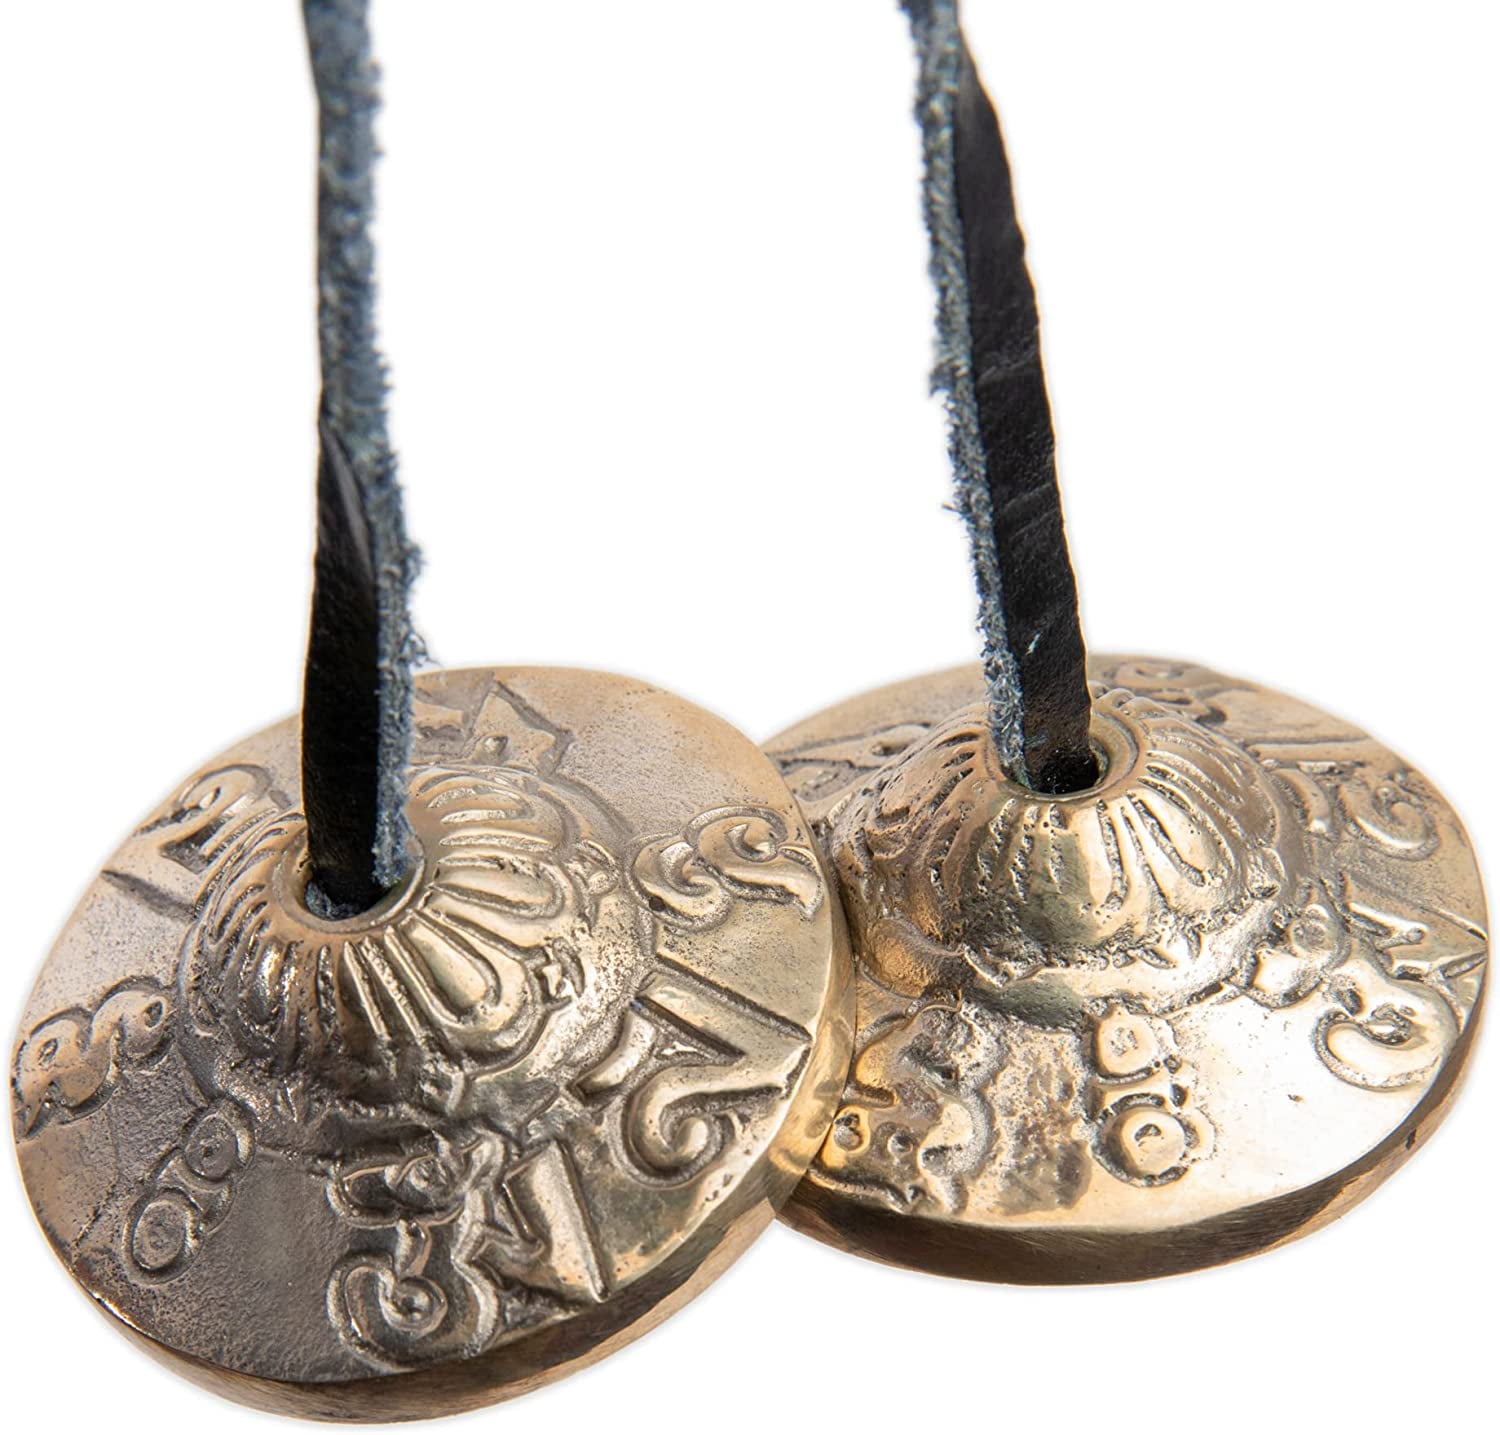 Tingsha Cymbals Tibetan Buddhist Lucky Symbol Embossed Meditation Yoga Bell  Chimes on black contrasting background. Tibetan bells for singing mantra.  Mantra bowls with leather ribbon. Stock Photo